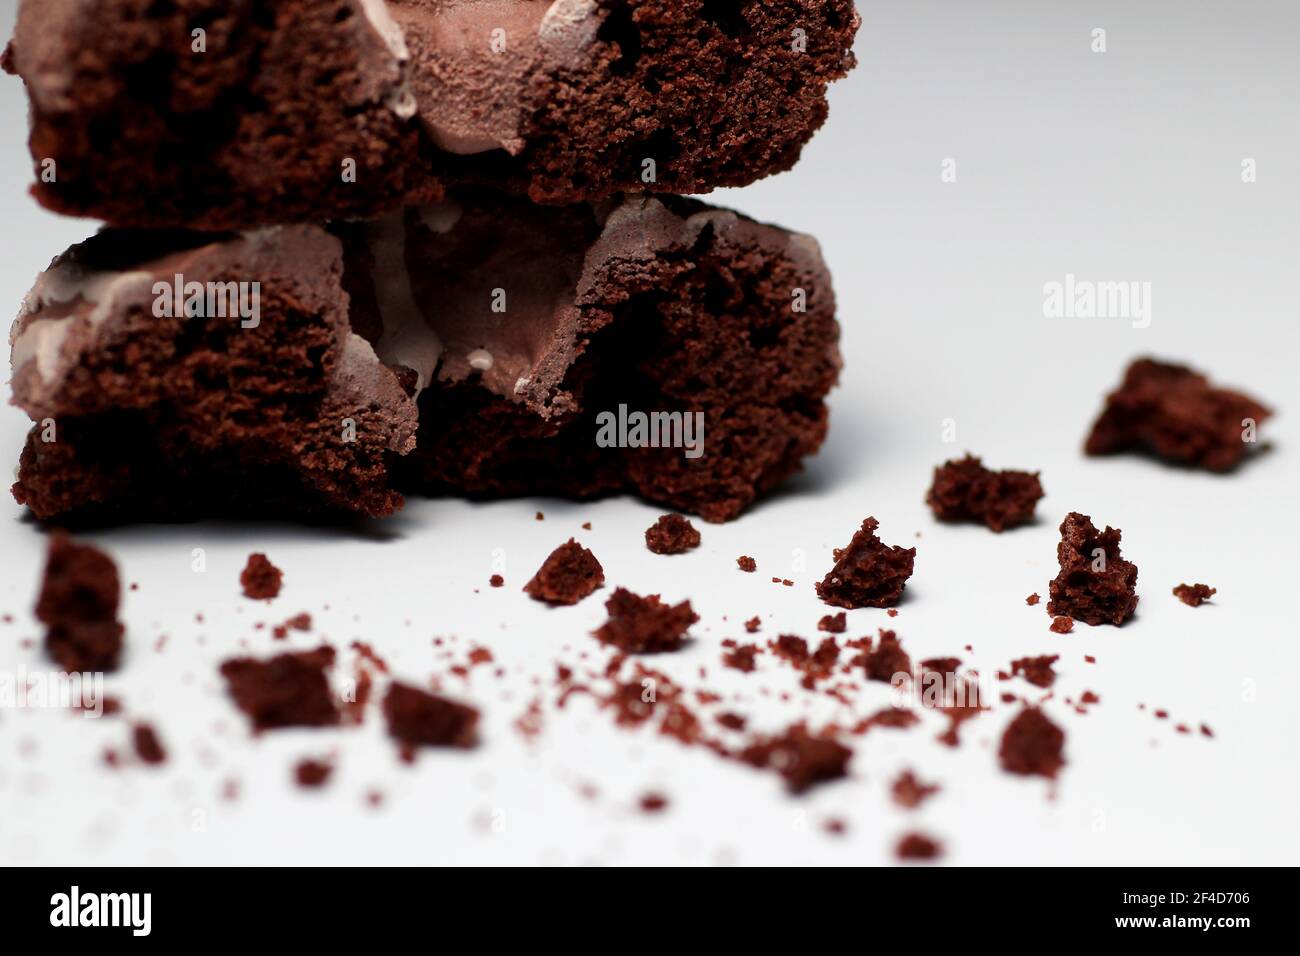 Close Up of Chocolate Donuts with Crumbs Stock Photo